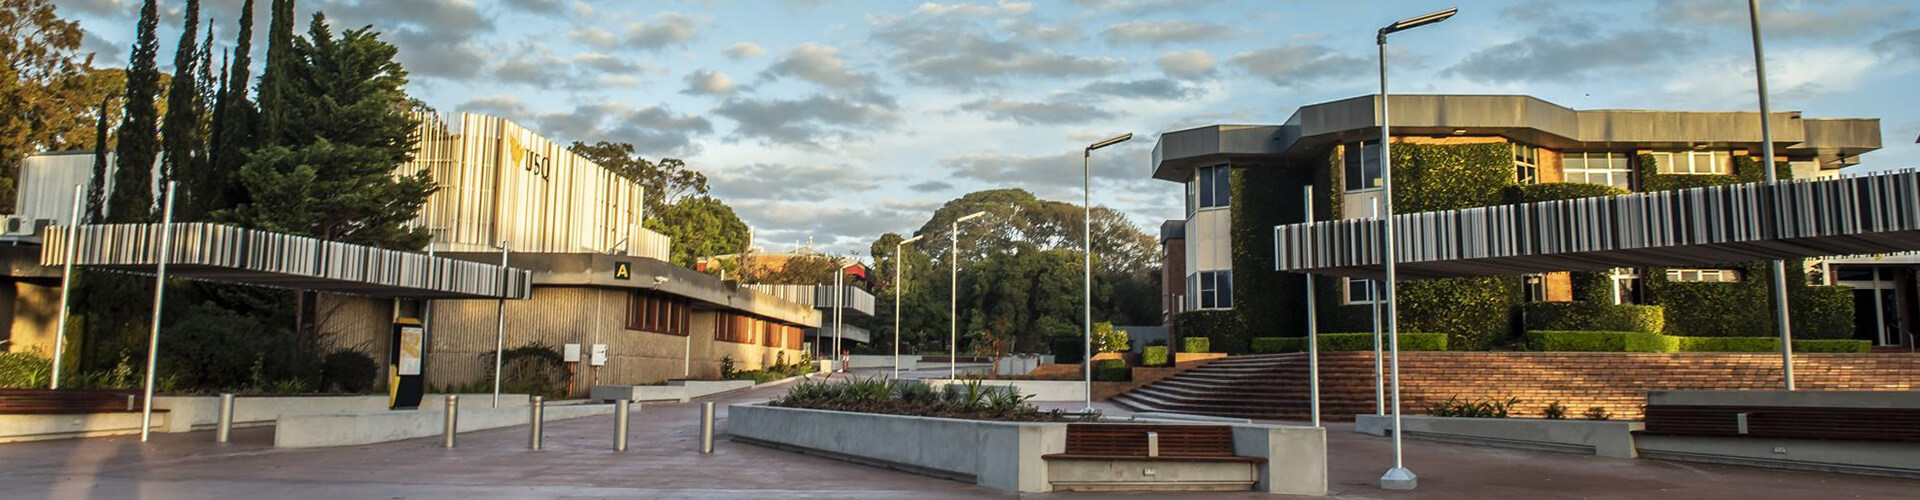 toowoomba campus entry